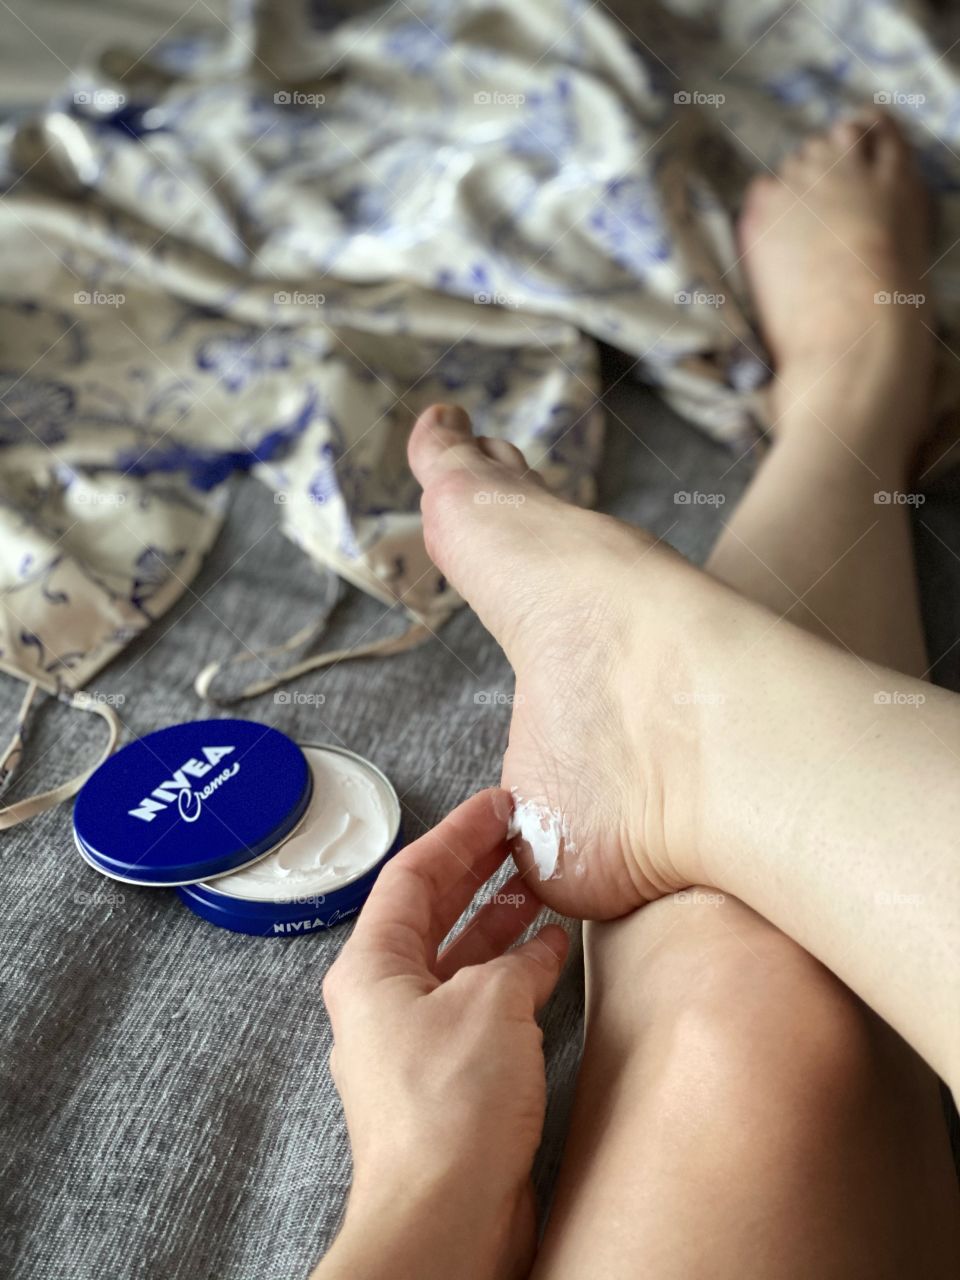 using Nivea cream to soften the skin of the heels.  Image of body parts of hands and feet in daylight on chemise background